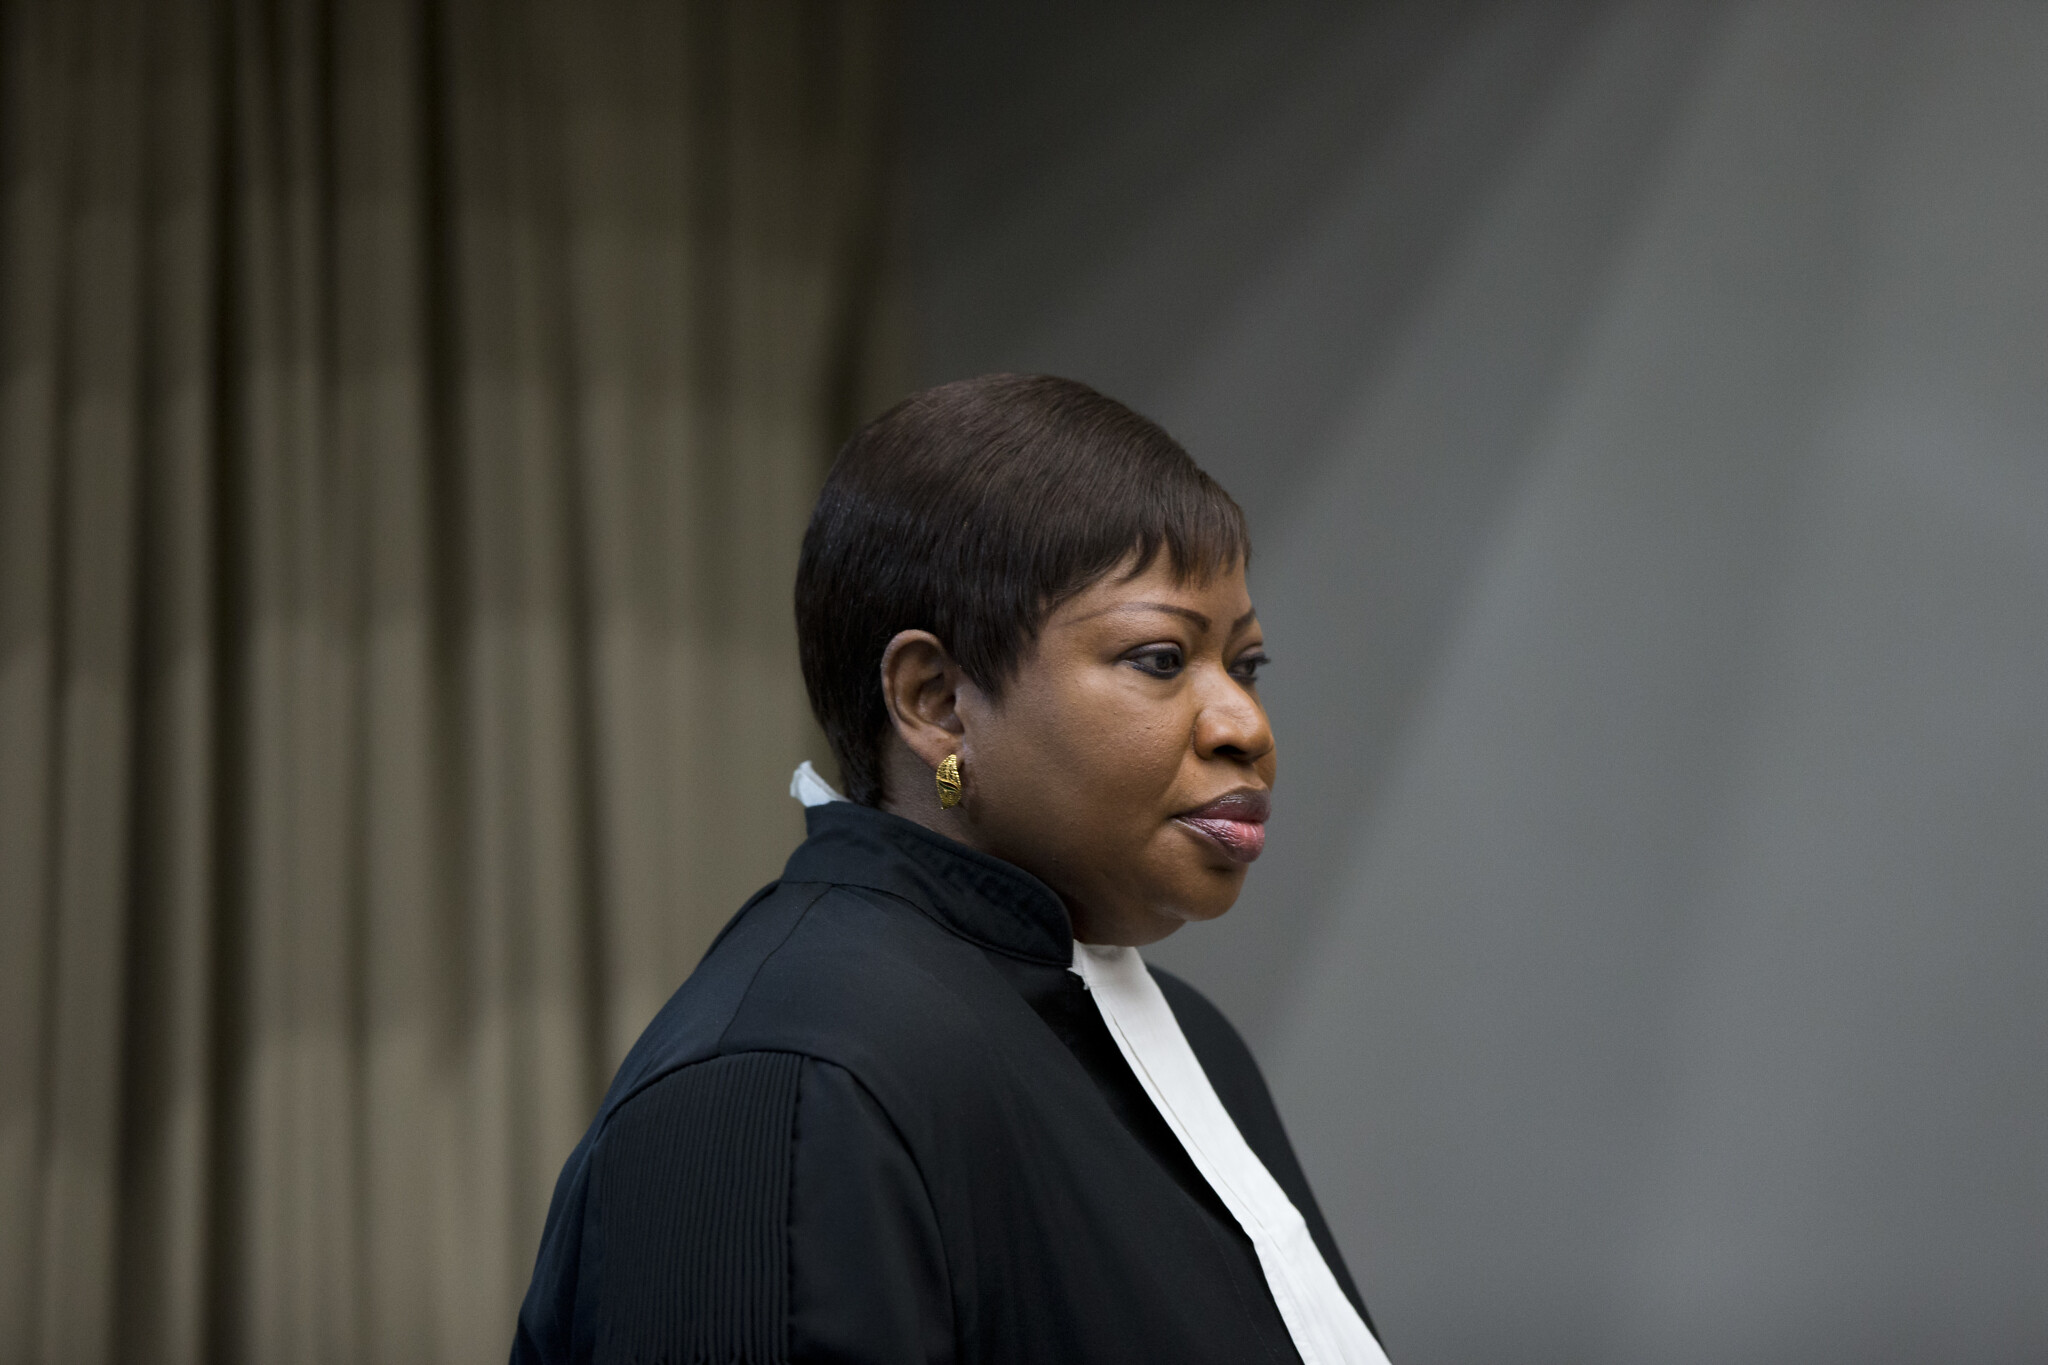 Public Prosecutor Fatou Bensouda enters the courtroom for the trial of Dominic Ongwen, a senior commander in the Lord's Resistance Army, whose fugitive leader Kony is one of the world's most-wanted war crimes suspects, at the International Court in The Hague, Netherlands, December 6, 2016. (AP Photo/Peter Dejong, Pool)